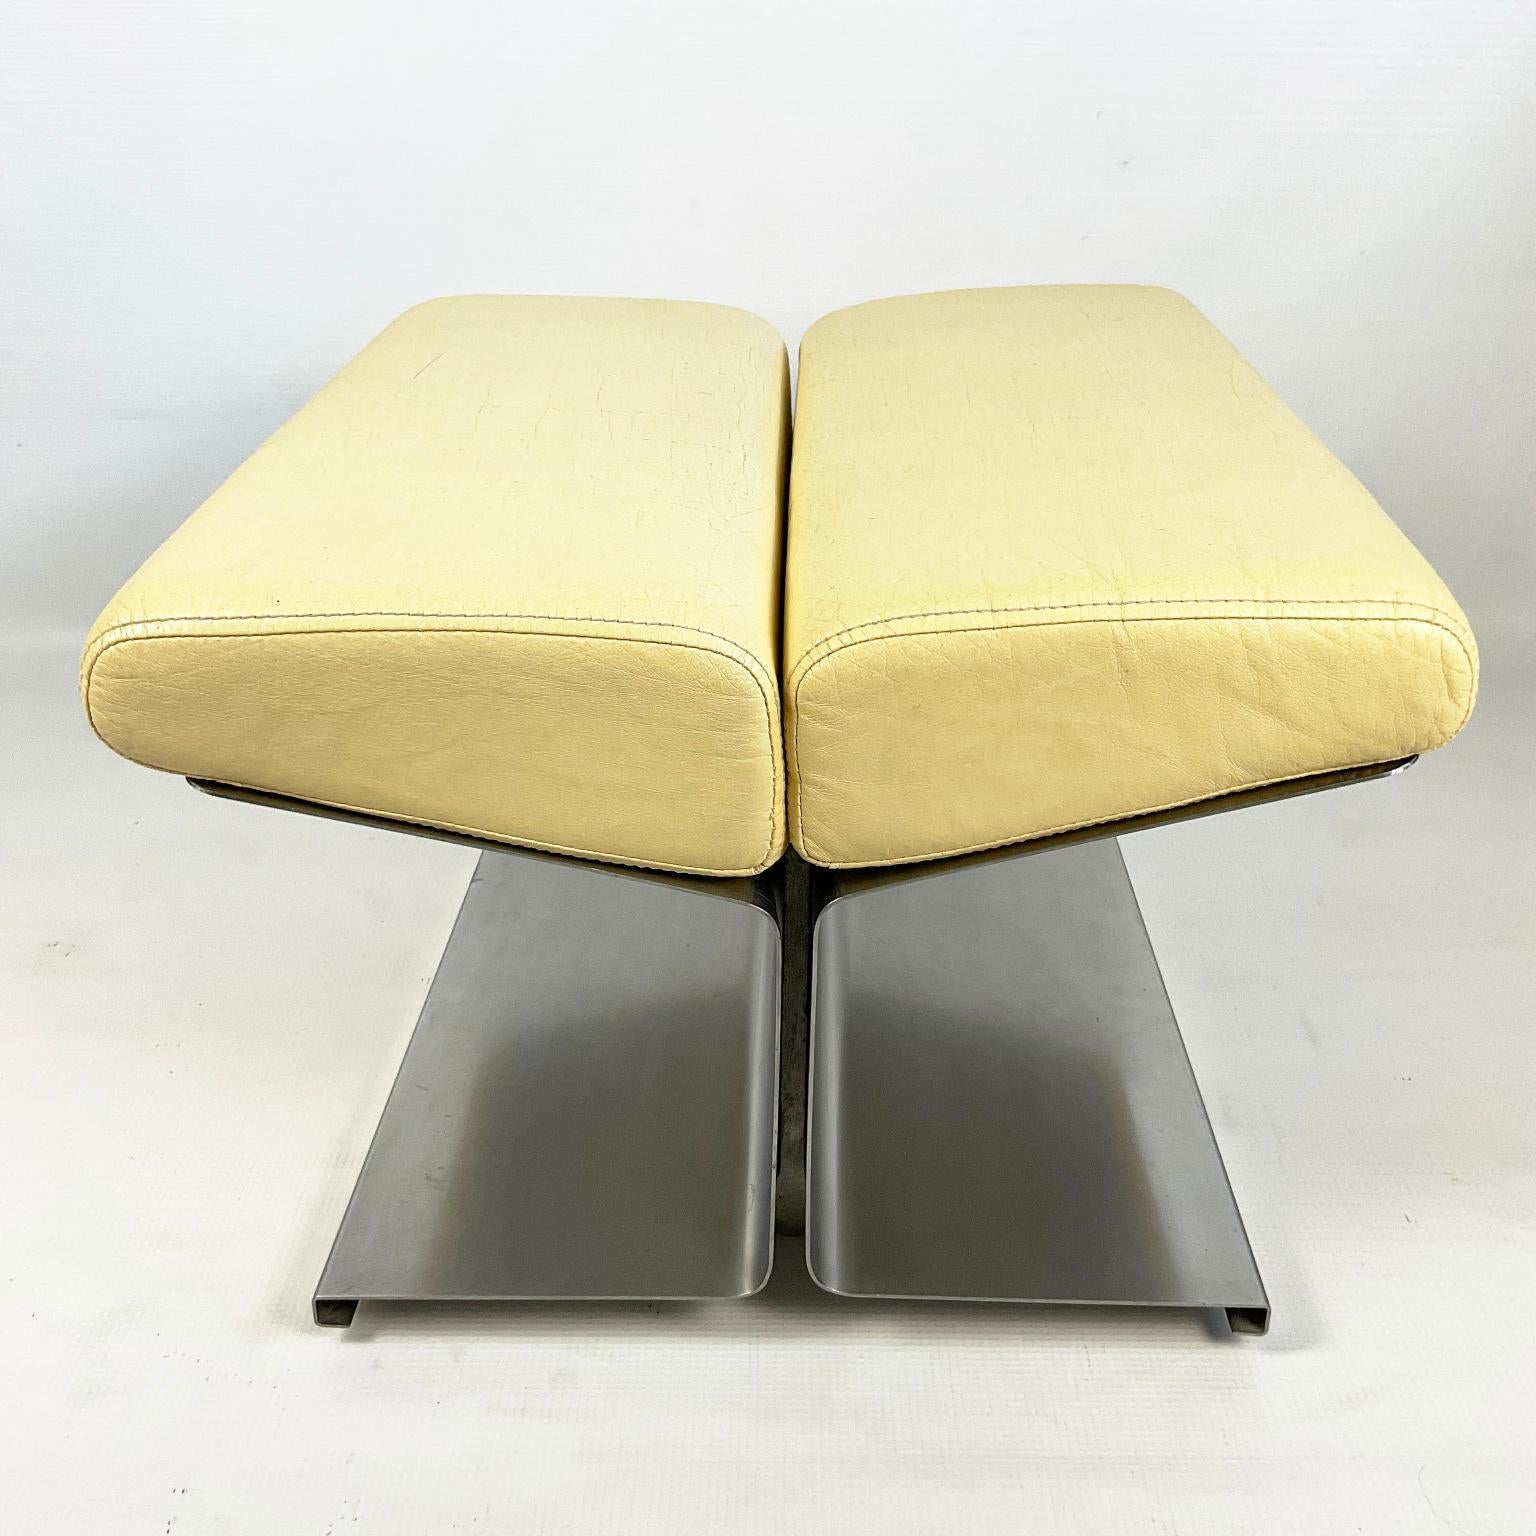 Space Age 1970s Ottoman by Paul Geoffroy for Uginox in Brushed Stainless Steel France For Sale